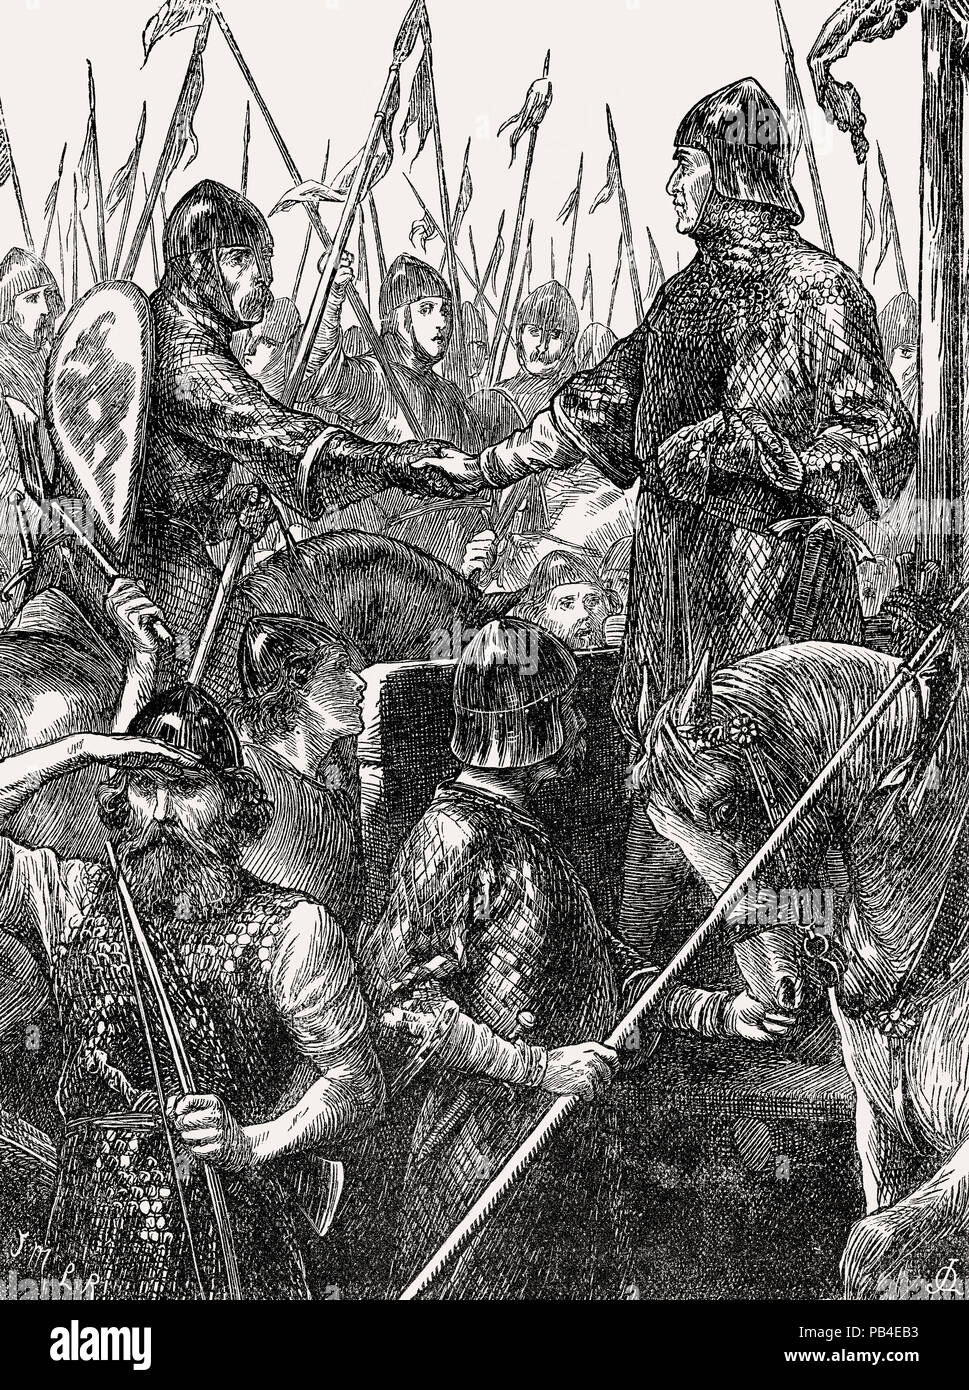 Walter Espec and William le Gros, the Earl of Albemarle, at the Battle of the Standard, 1138, From British Battles on Land and Sea, by James Grant Stock Photo